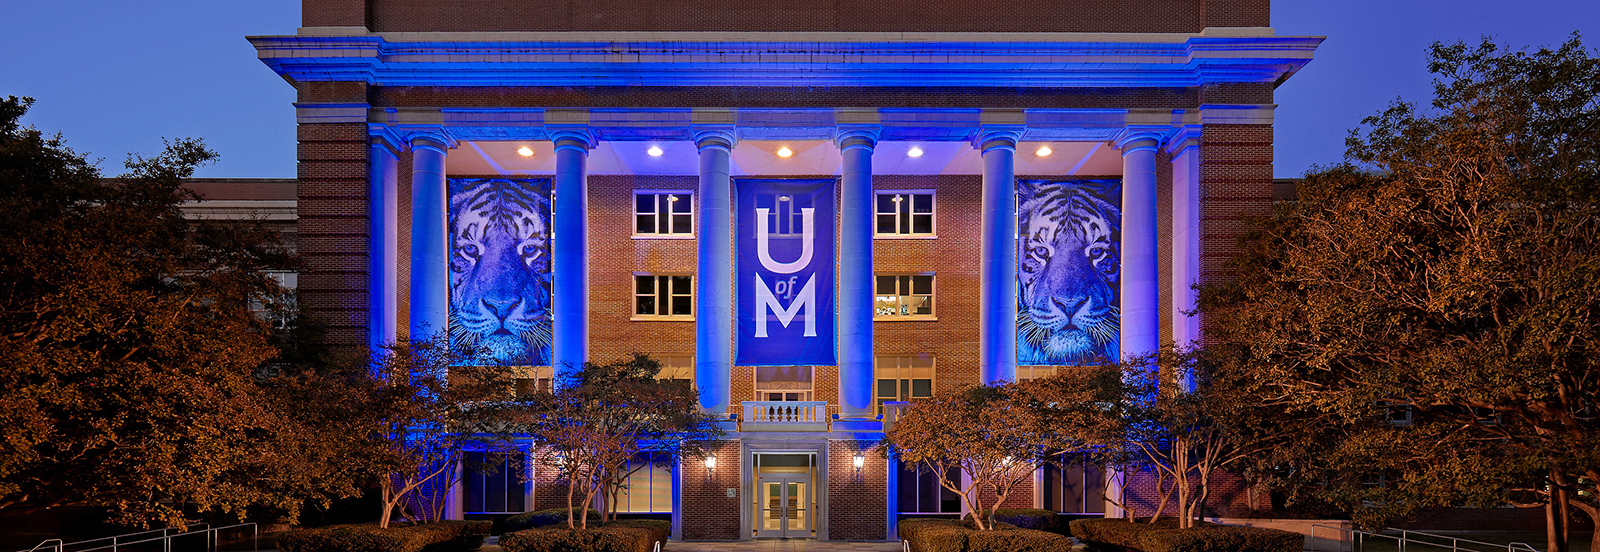 Picture of Administration Building at Night with blue lights